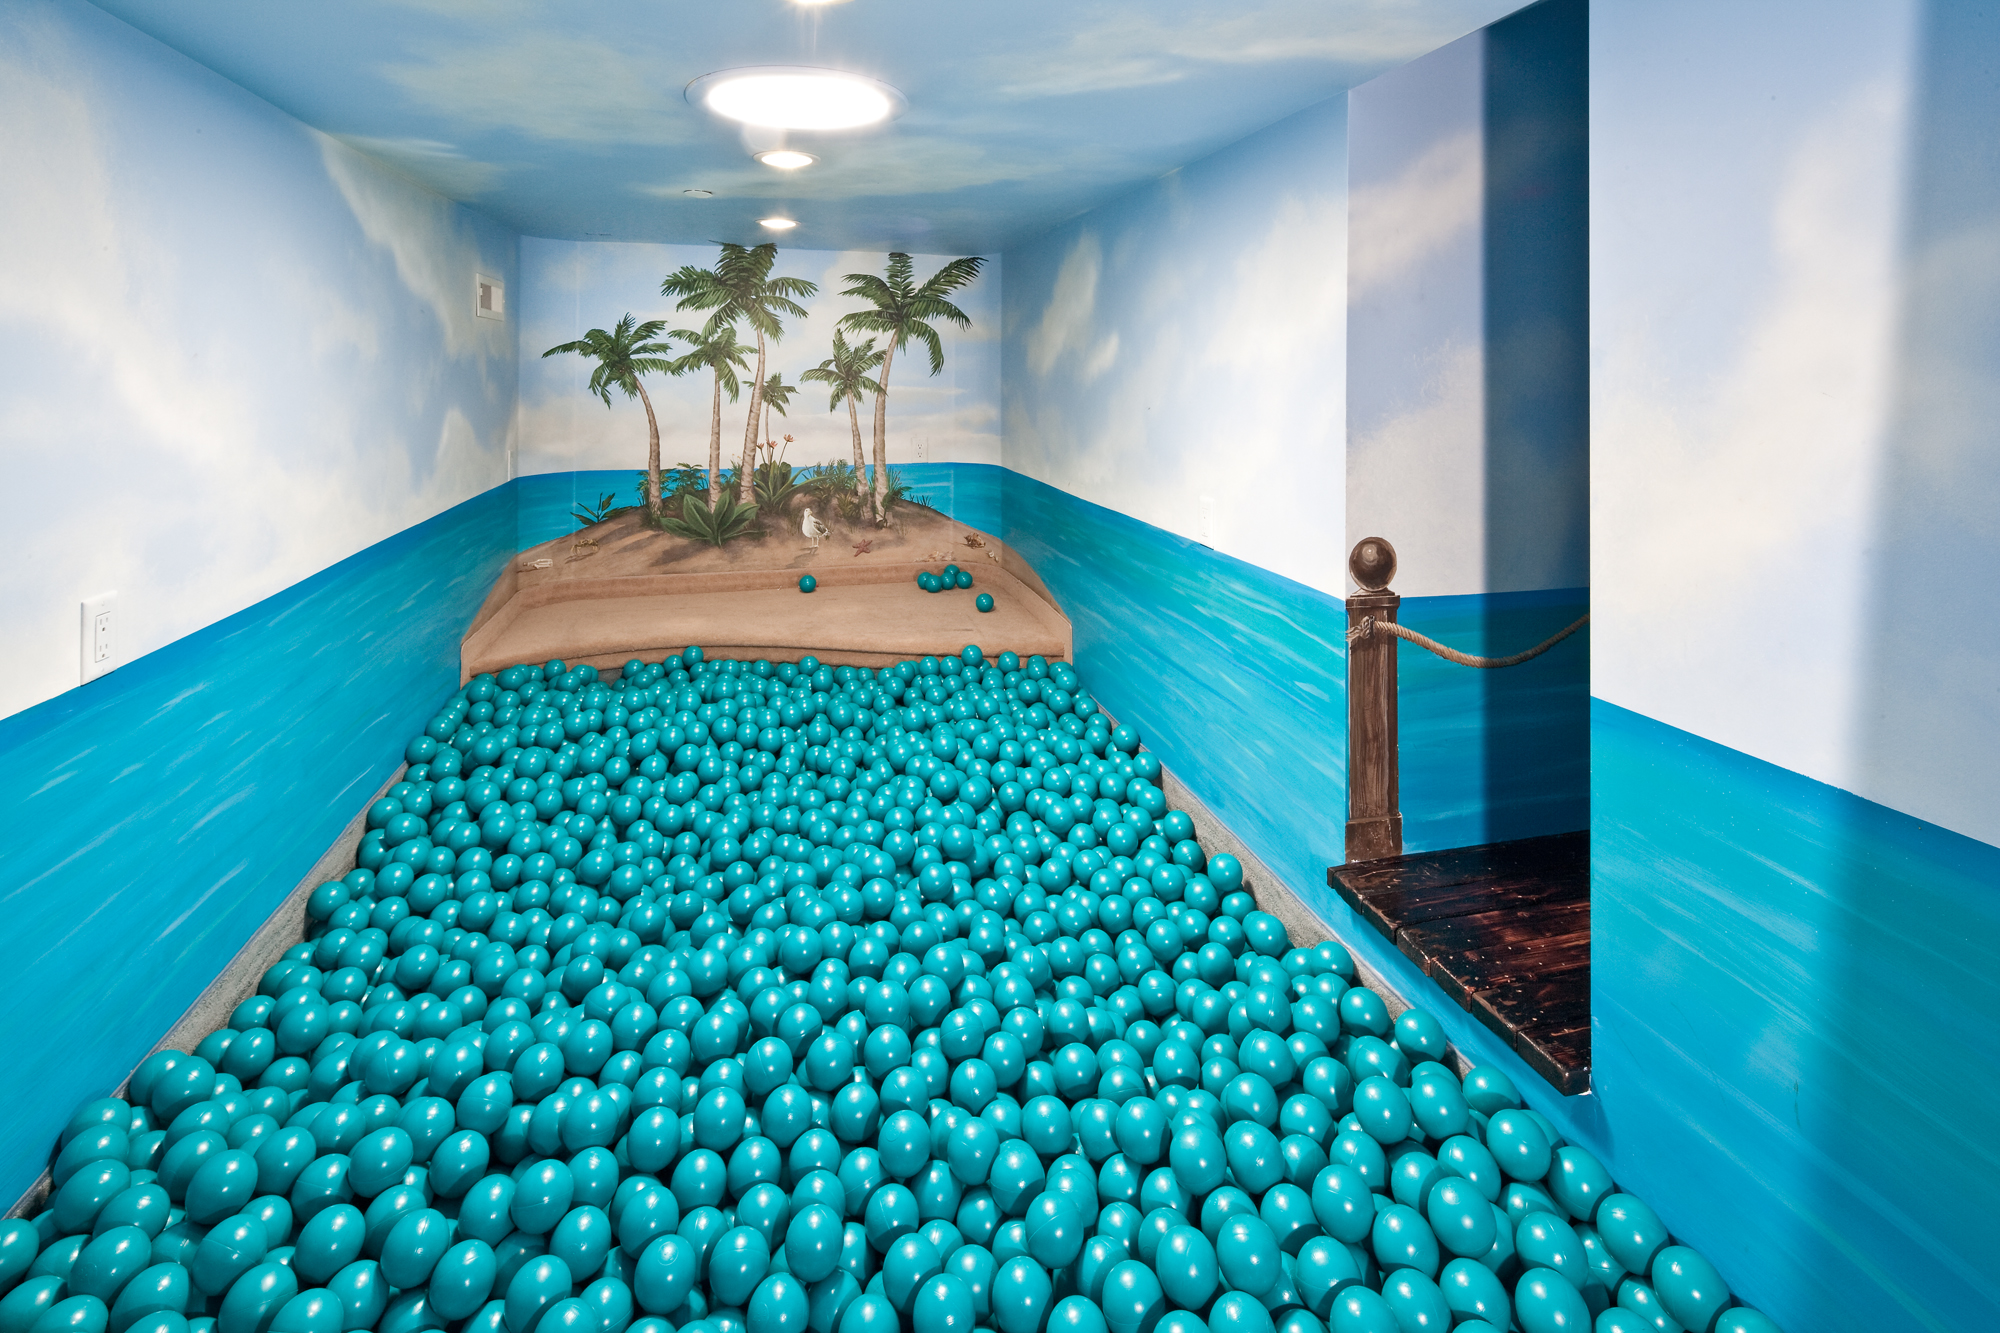 An indoor ball pit that looks like a tropical island on a sunny day with clear skies.